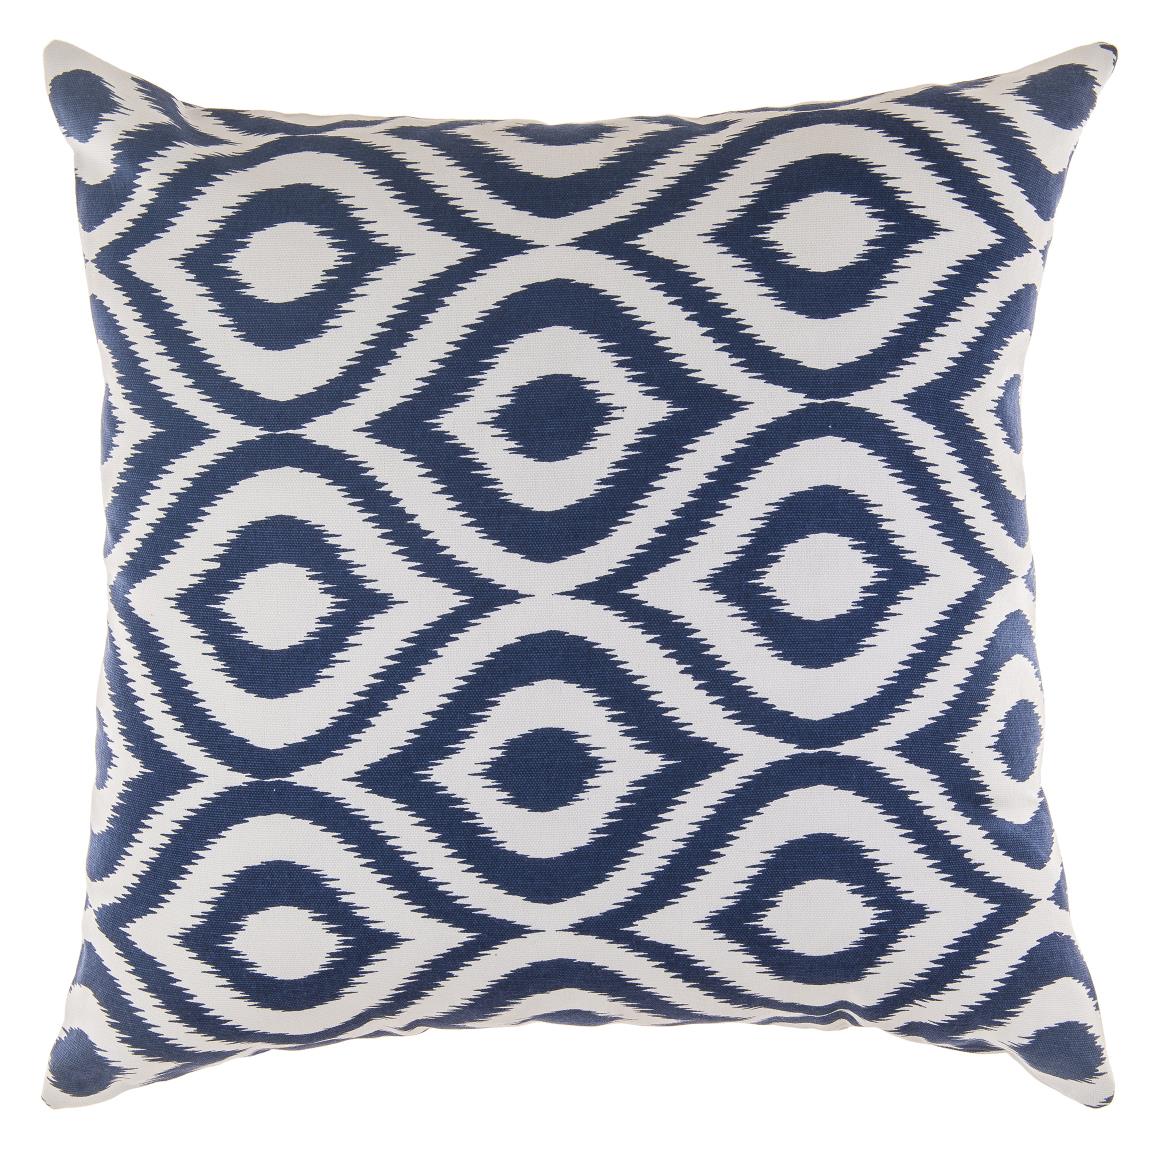 Ogee Ikat Accent Decorative Throw Pillow Covers (Pack of 2) - TreeWool